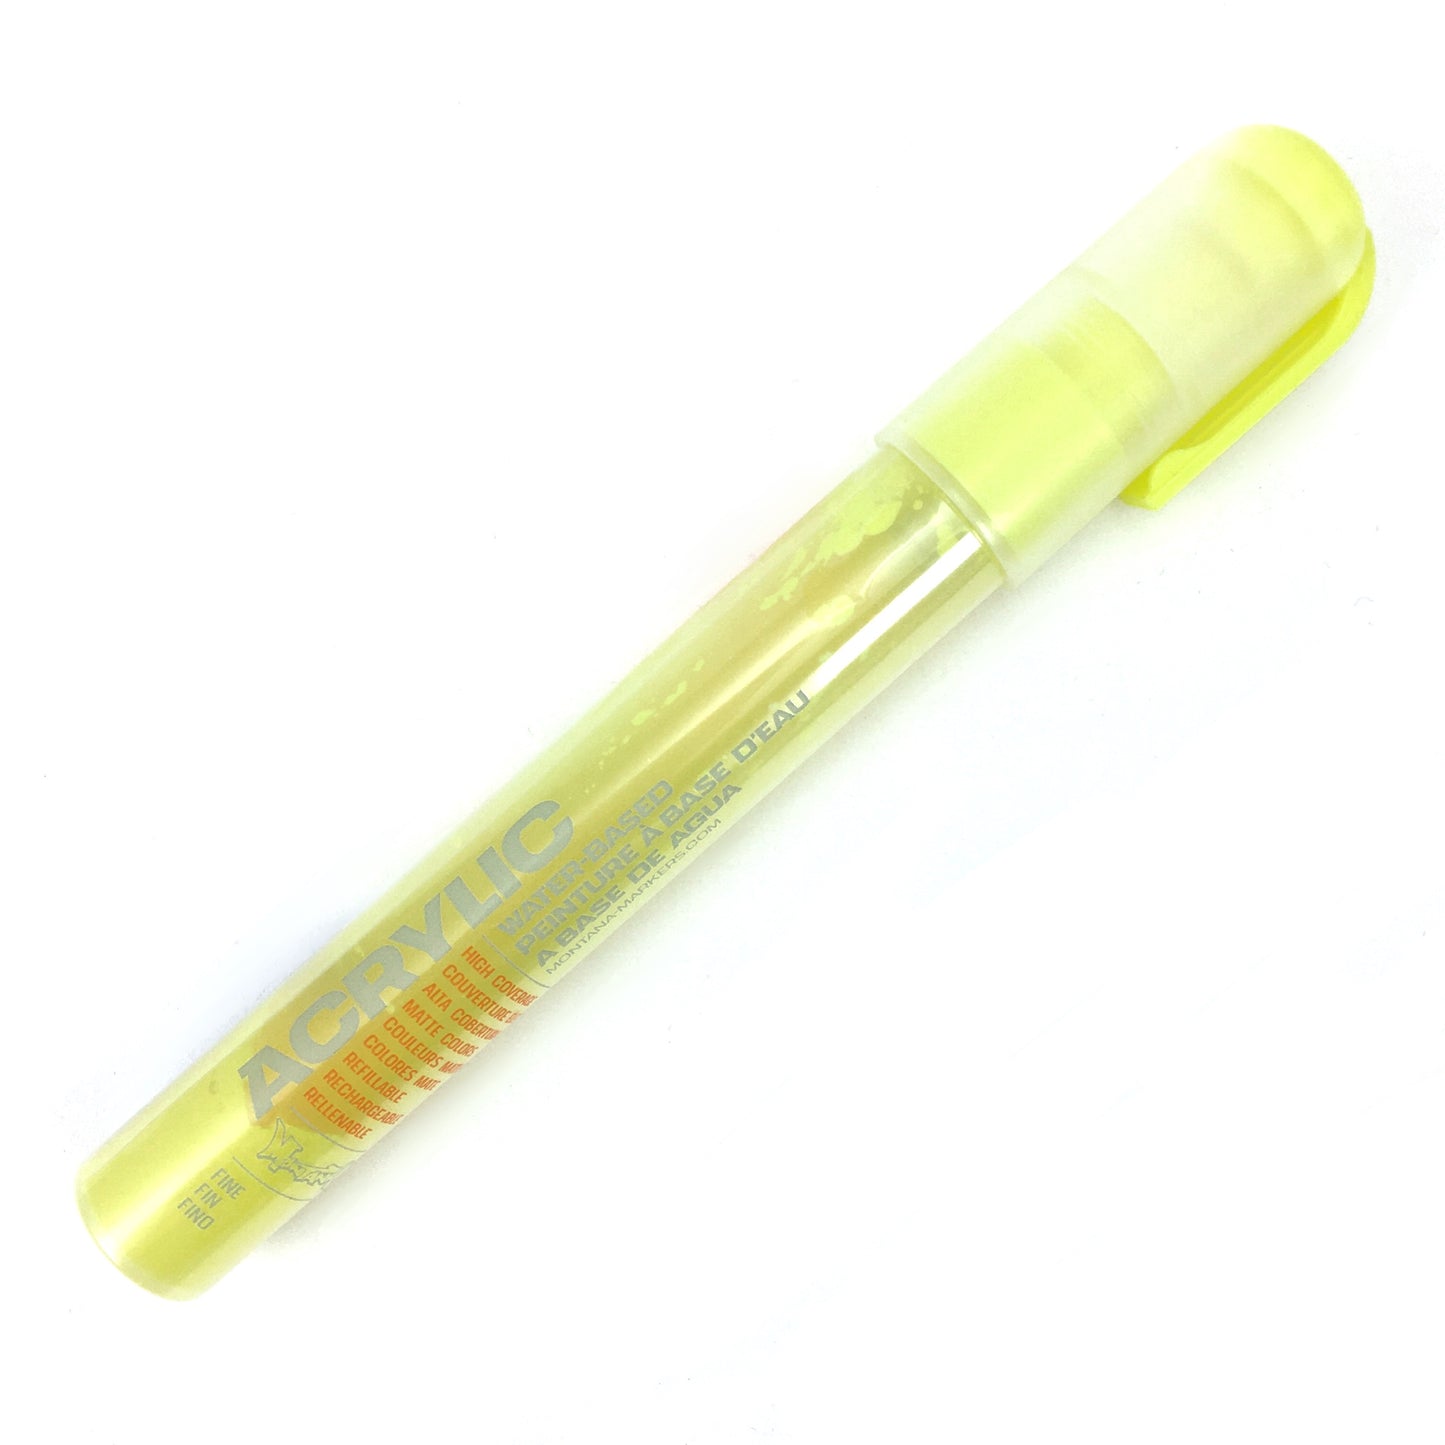 Montana Acrylic Paint Markers - Individuals - Flash Yellow / 2 mm by Montana - K. A. Artist Shop